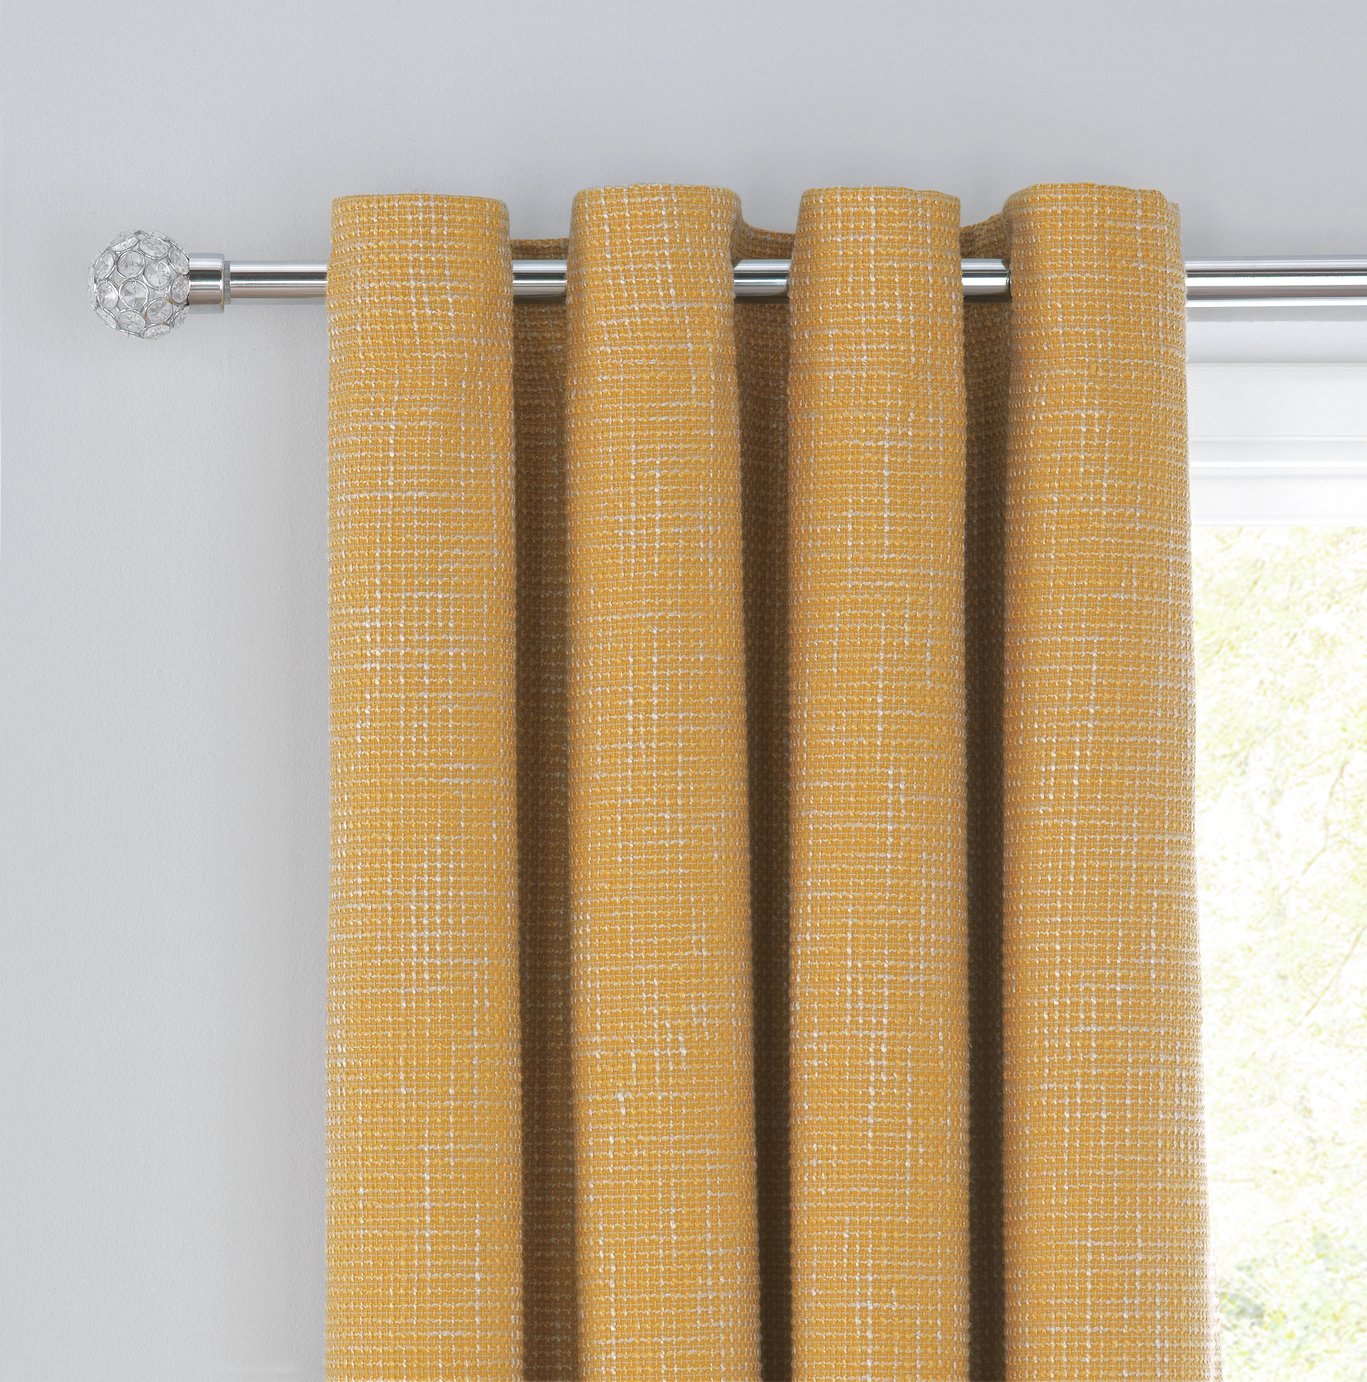 Argos Home Weave Blackout Lined Eyelet Curtains - Mustard